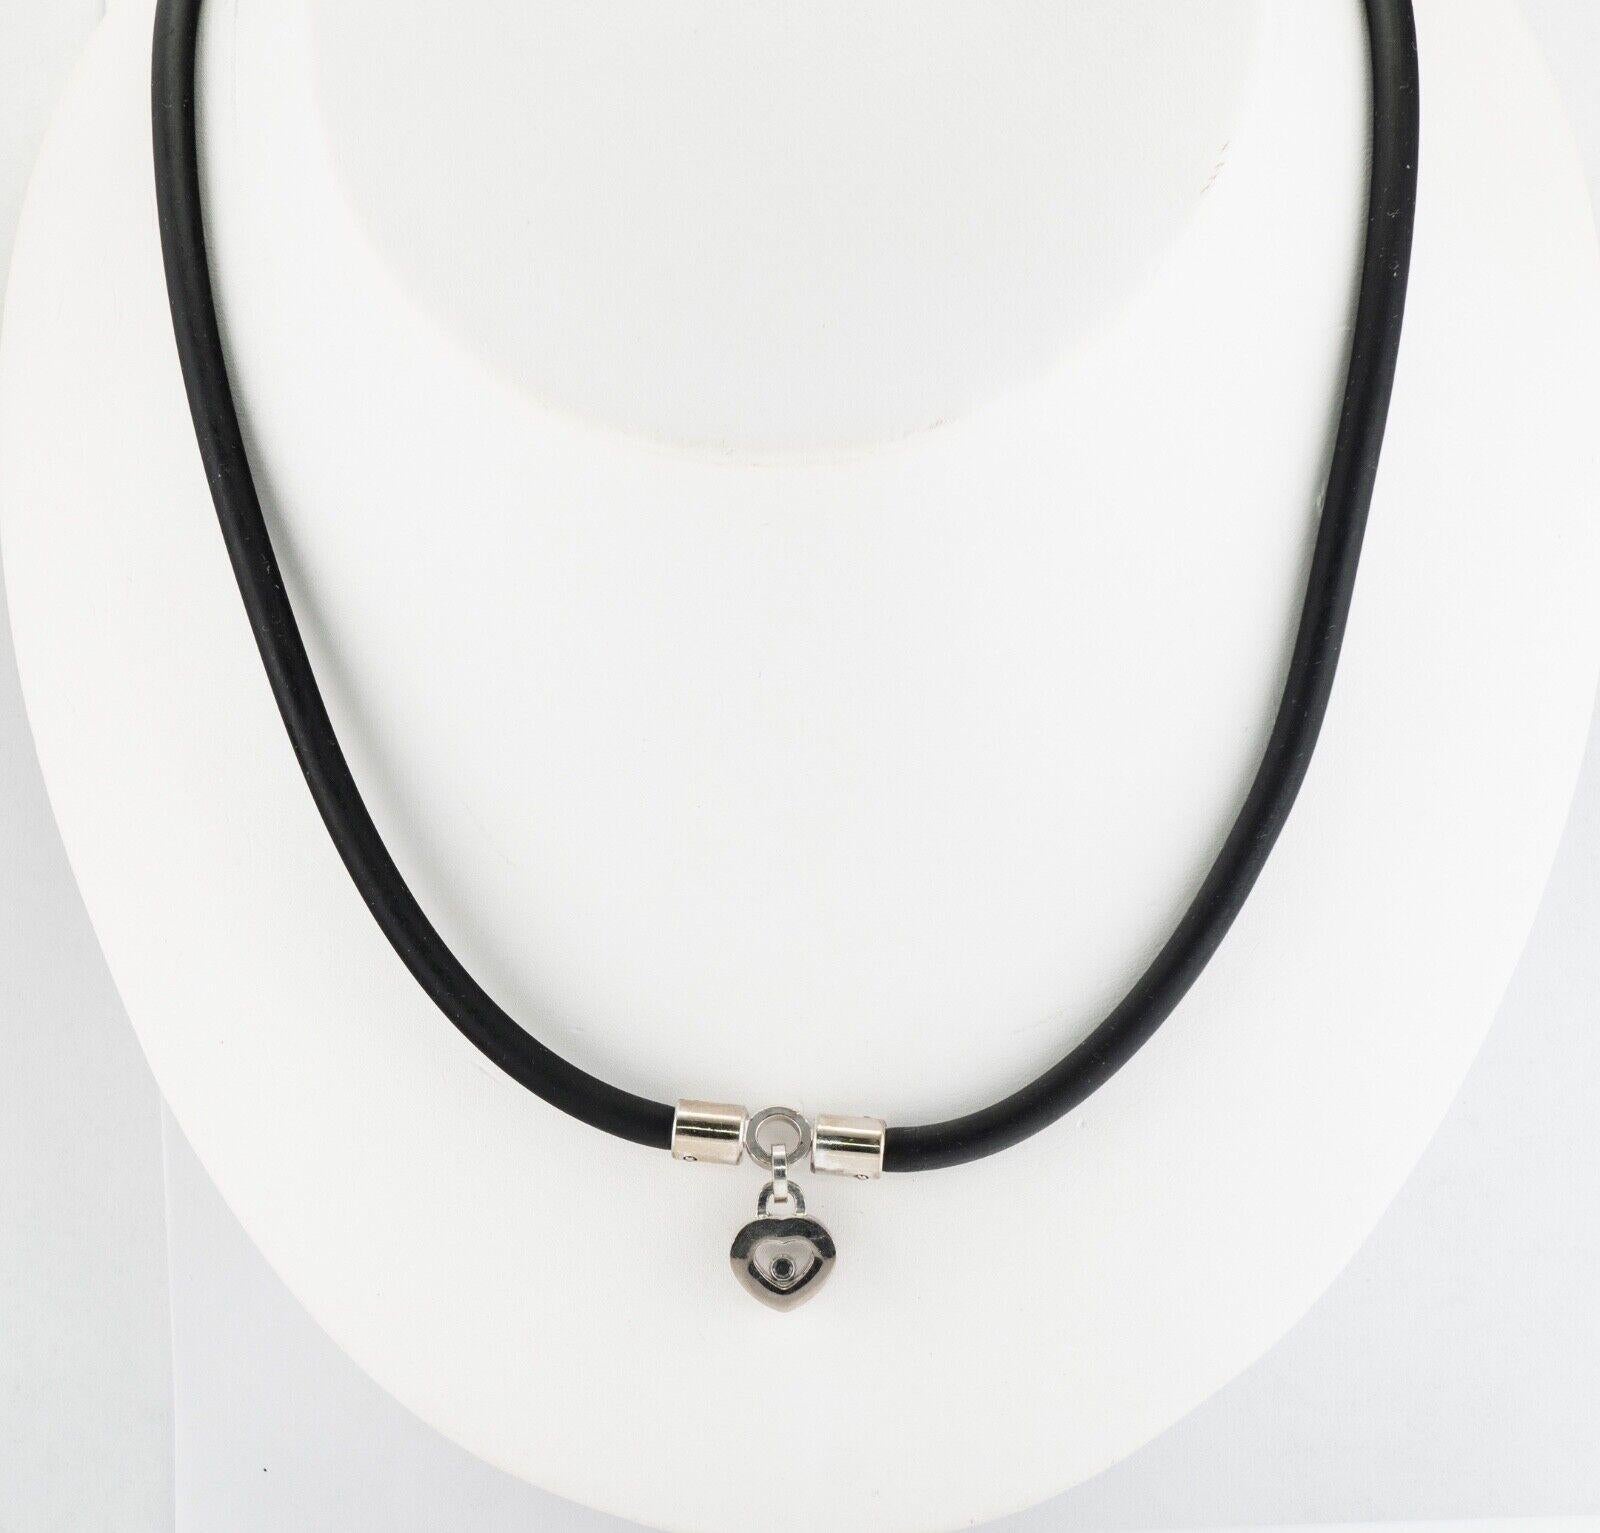 Chopard Black Diamond Heart Necklace Charm 18K White Gold Rubber Cord

This playful necklace from Chopard's Happy Diamonds collection has a vibrancy that is incomparable. The necklace is a black rubber cord with petite white gold pendant. The